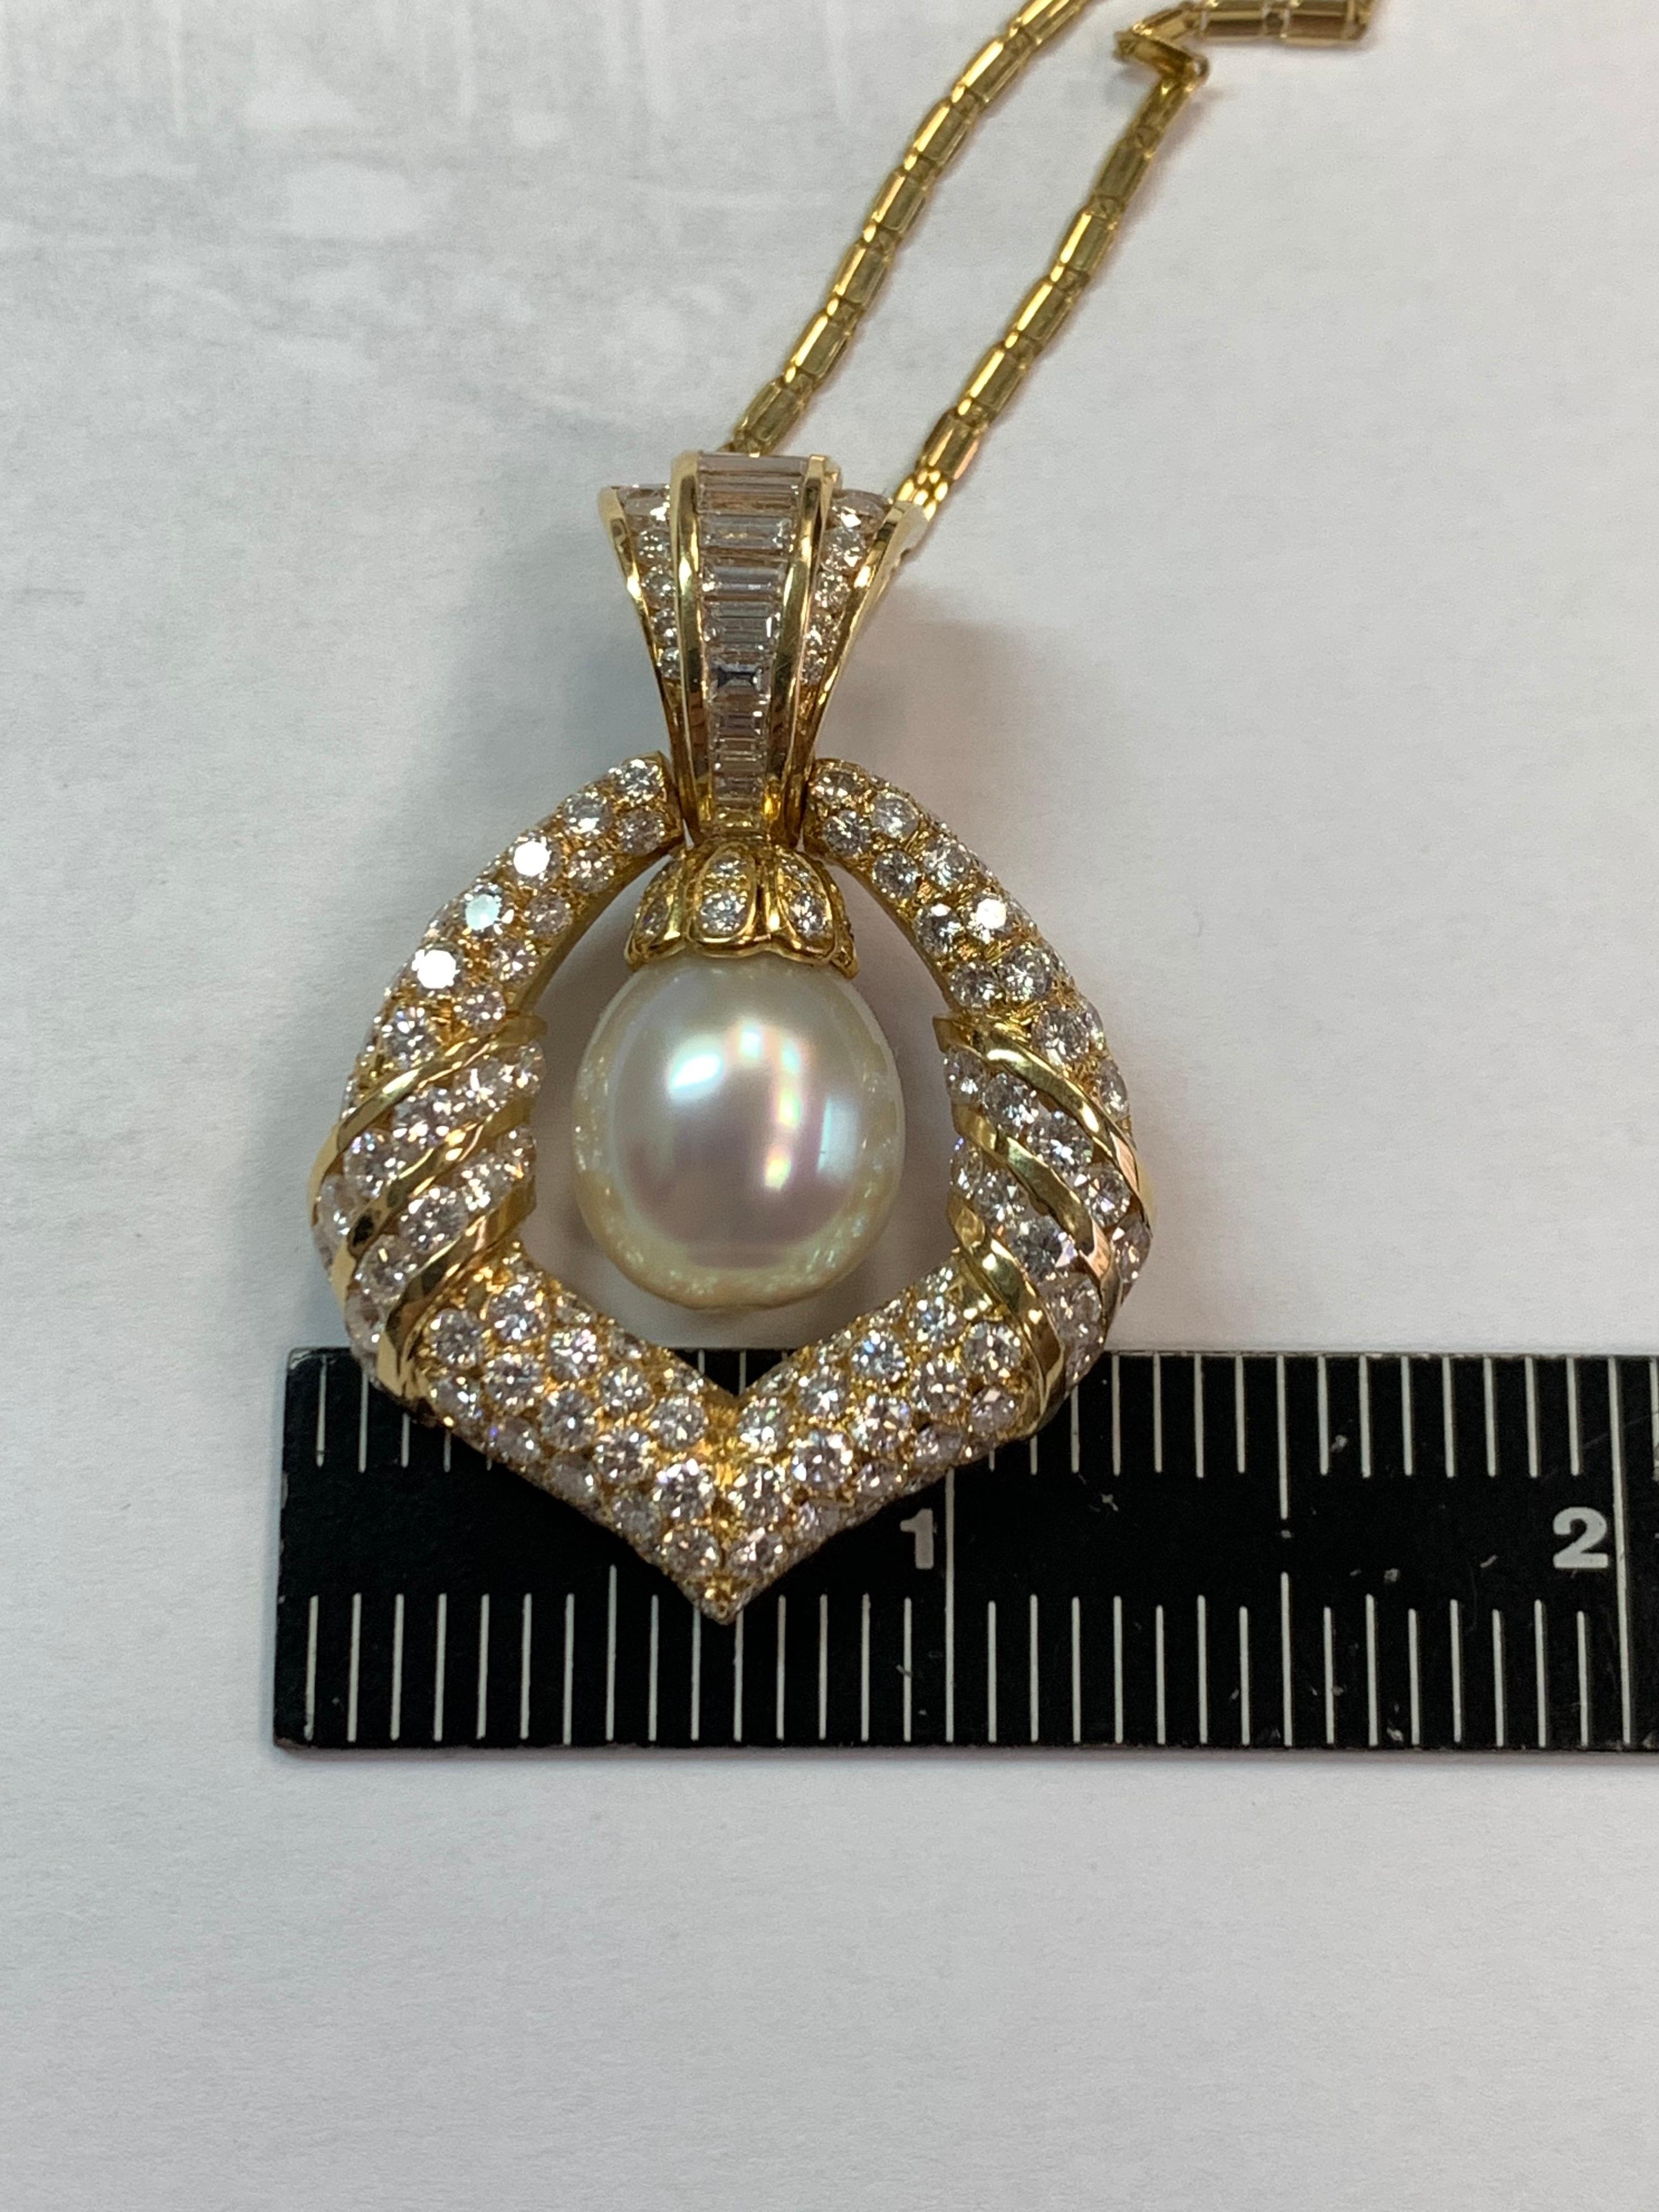 Retro Gold Necklace 7.5 Carat Natural Round Colorless Diamond & Pearl circa 1950 For Sale 4